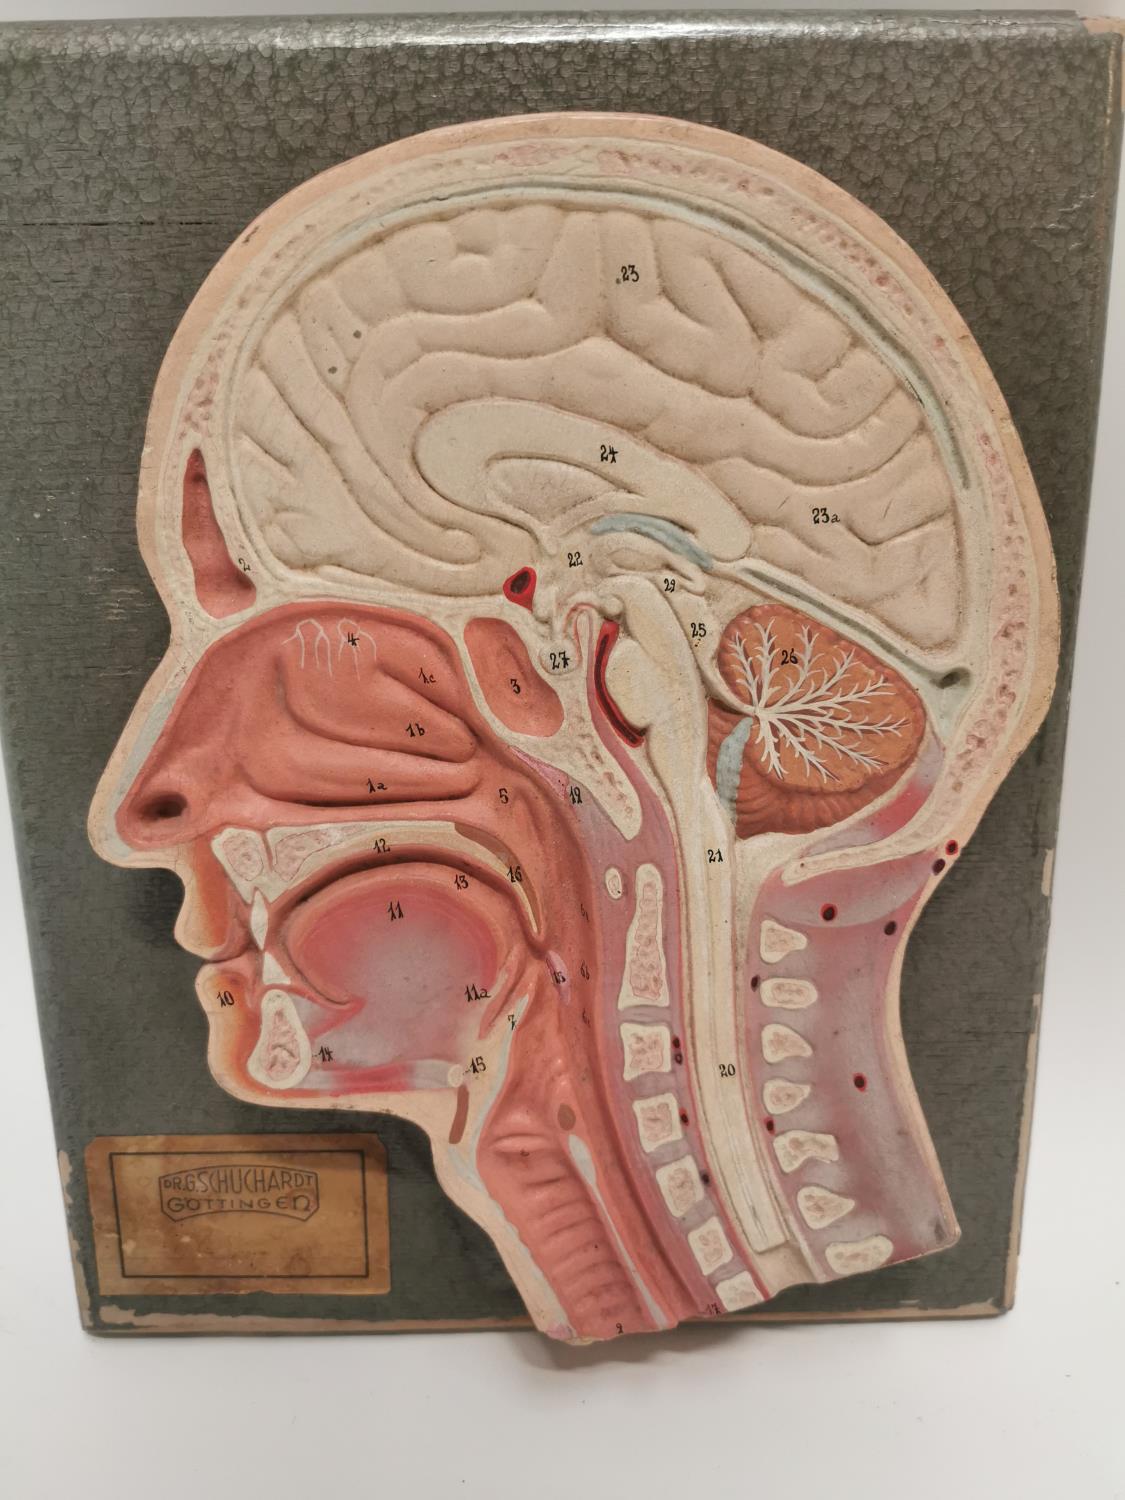 Early 20th C. rubberoid head anatomy medical model. - Image 2 of 2